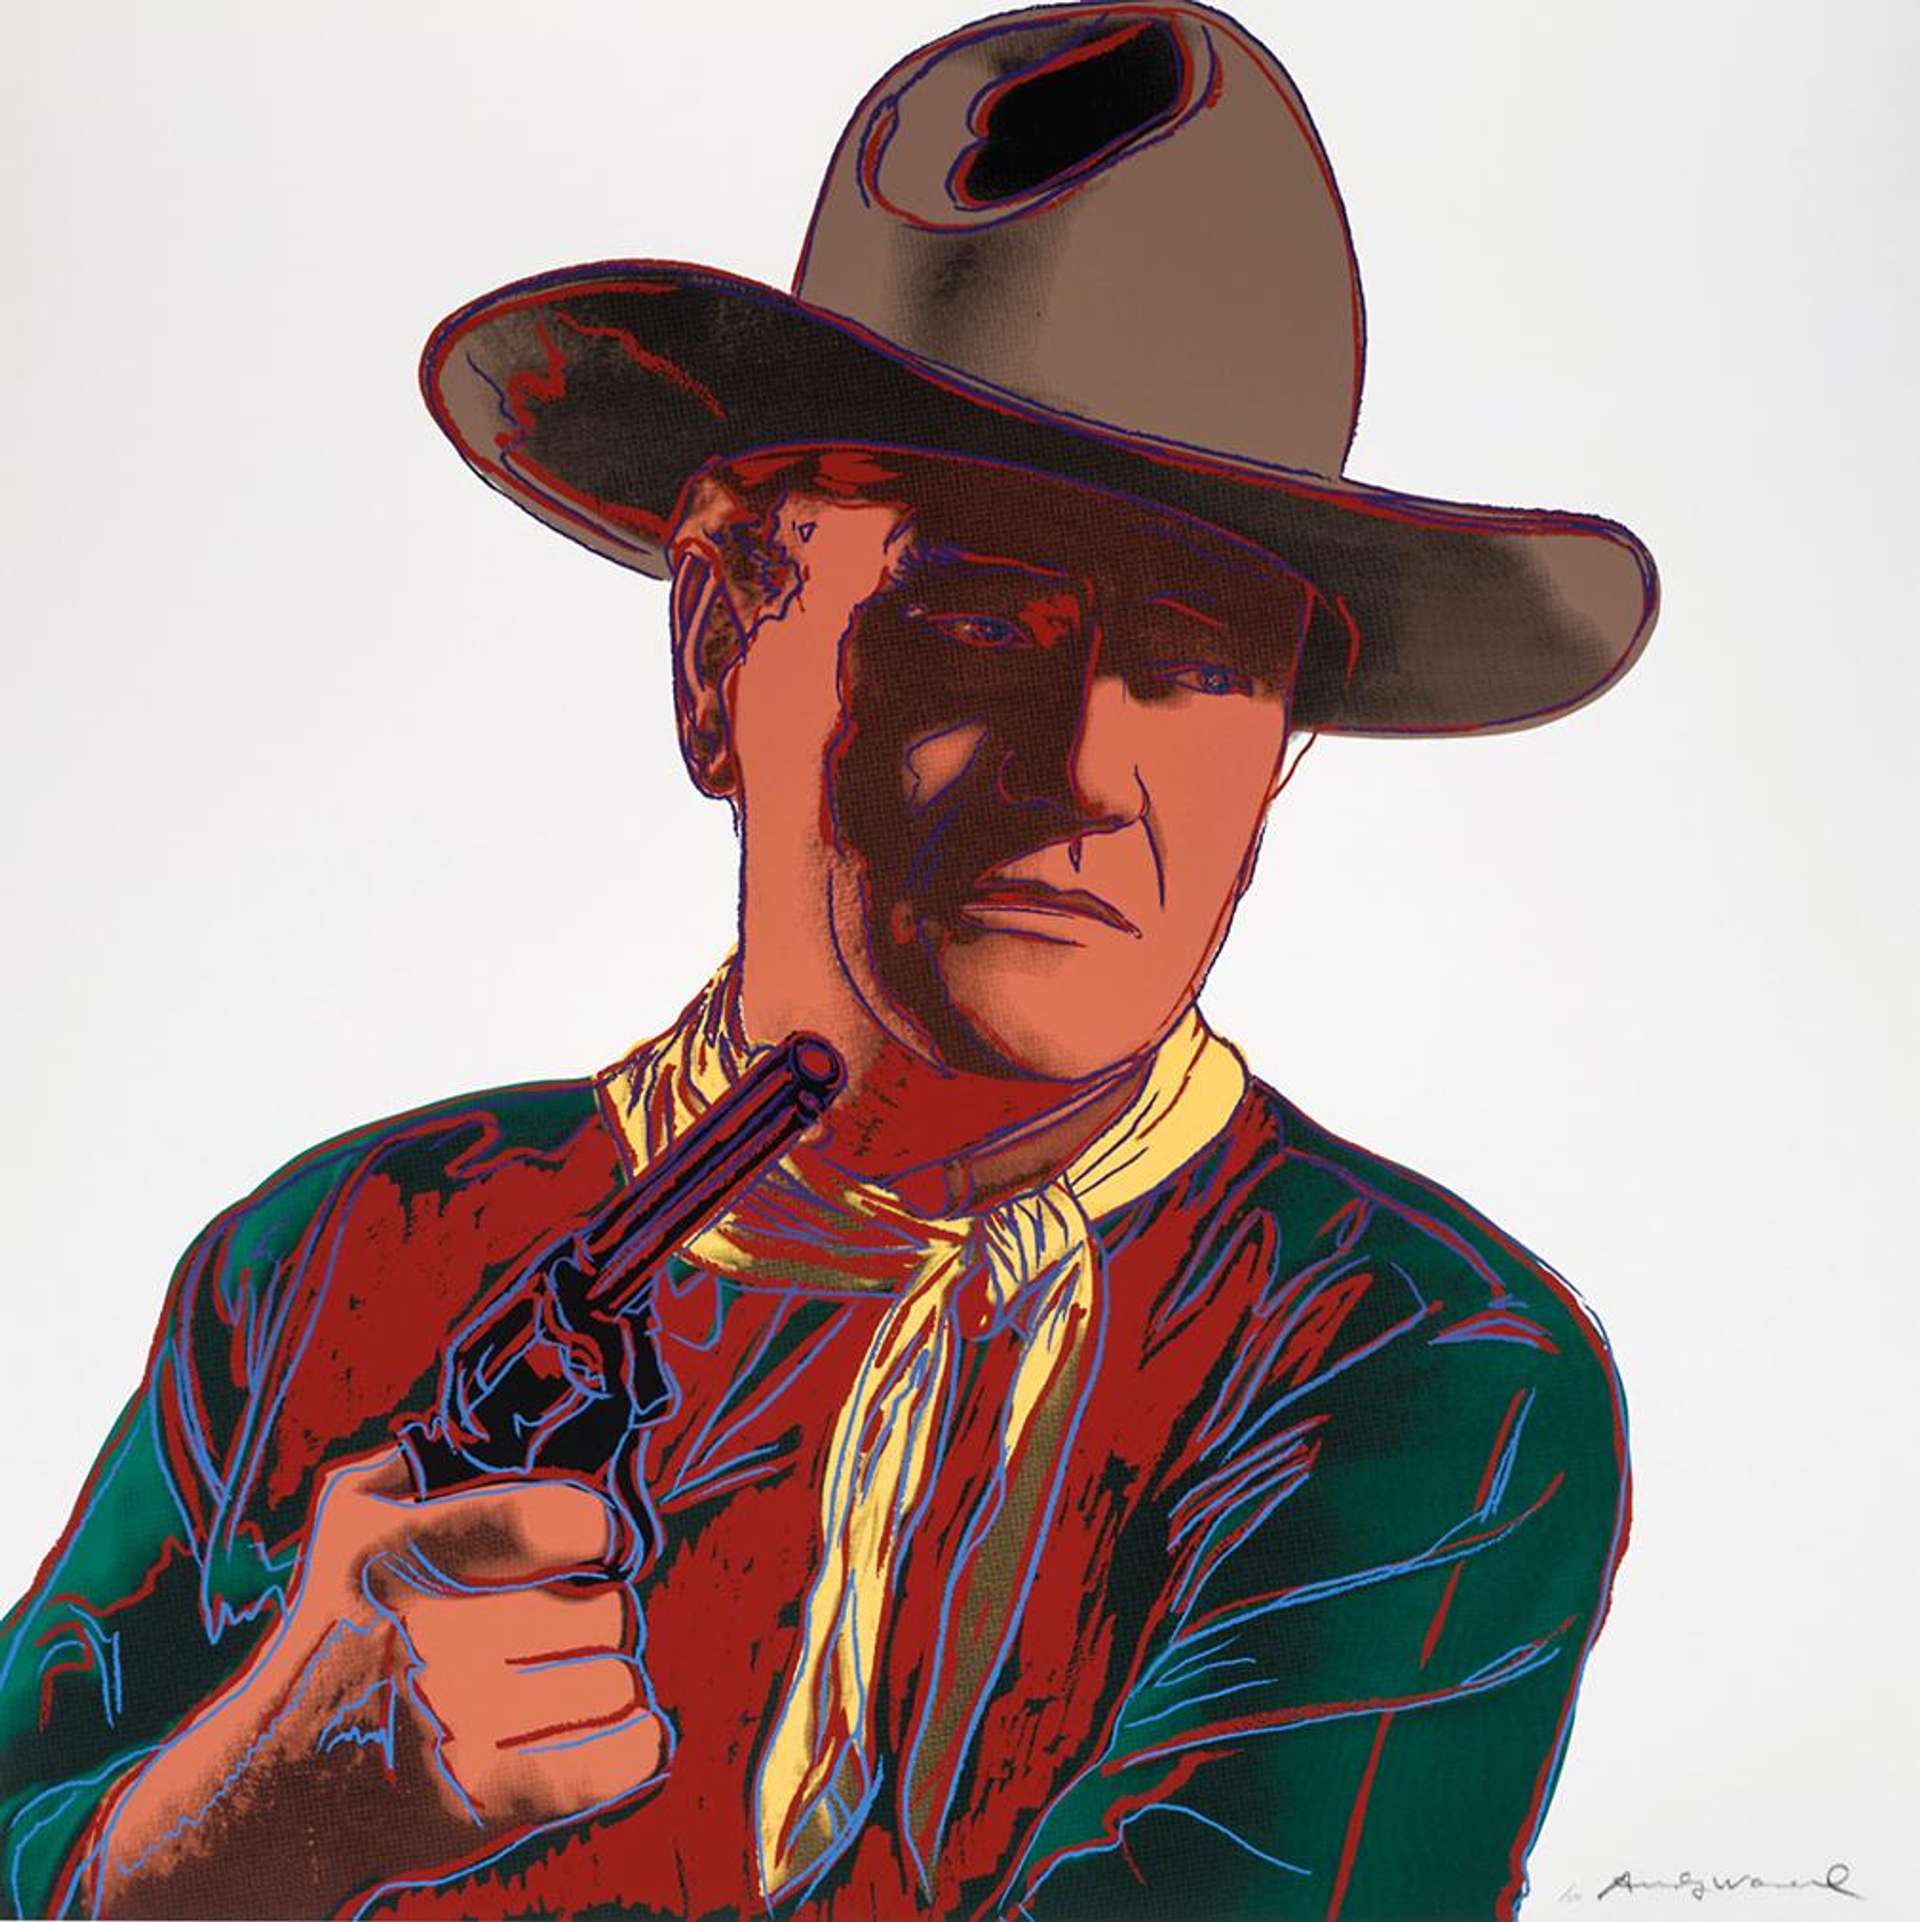 Screenprint artwork by Andy Warhol. A cropped portrait of an American Cowboy wearing a cowboy hat, holding a pistol across his chest and gazing sideways.